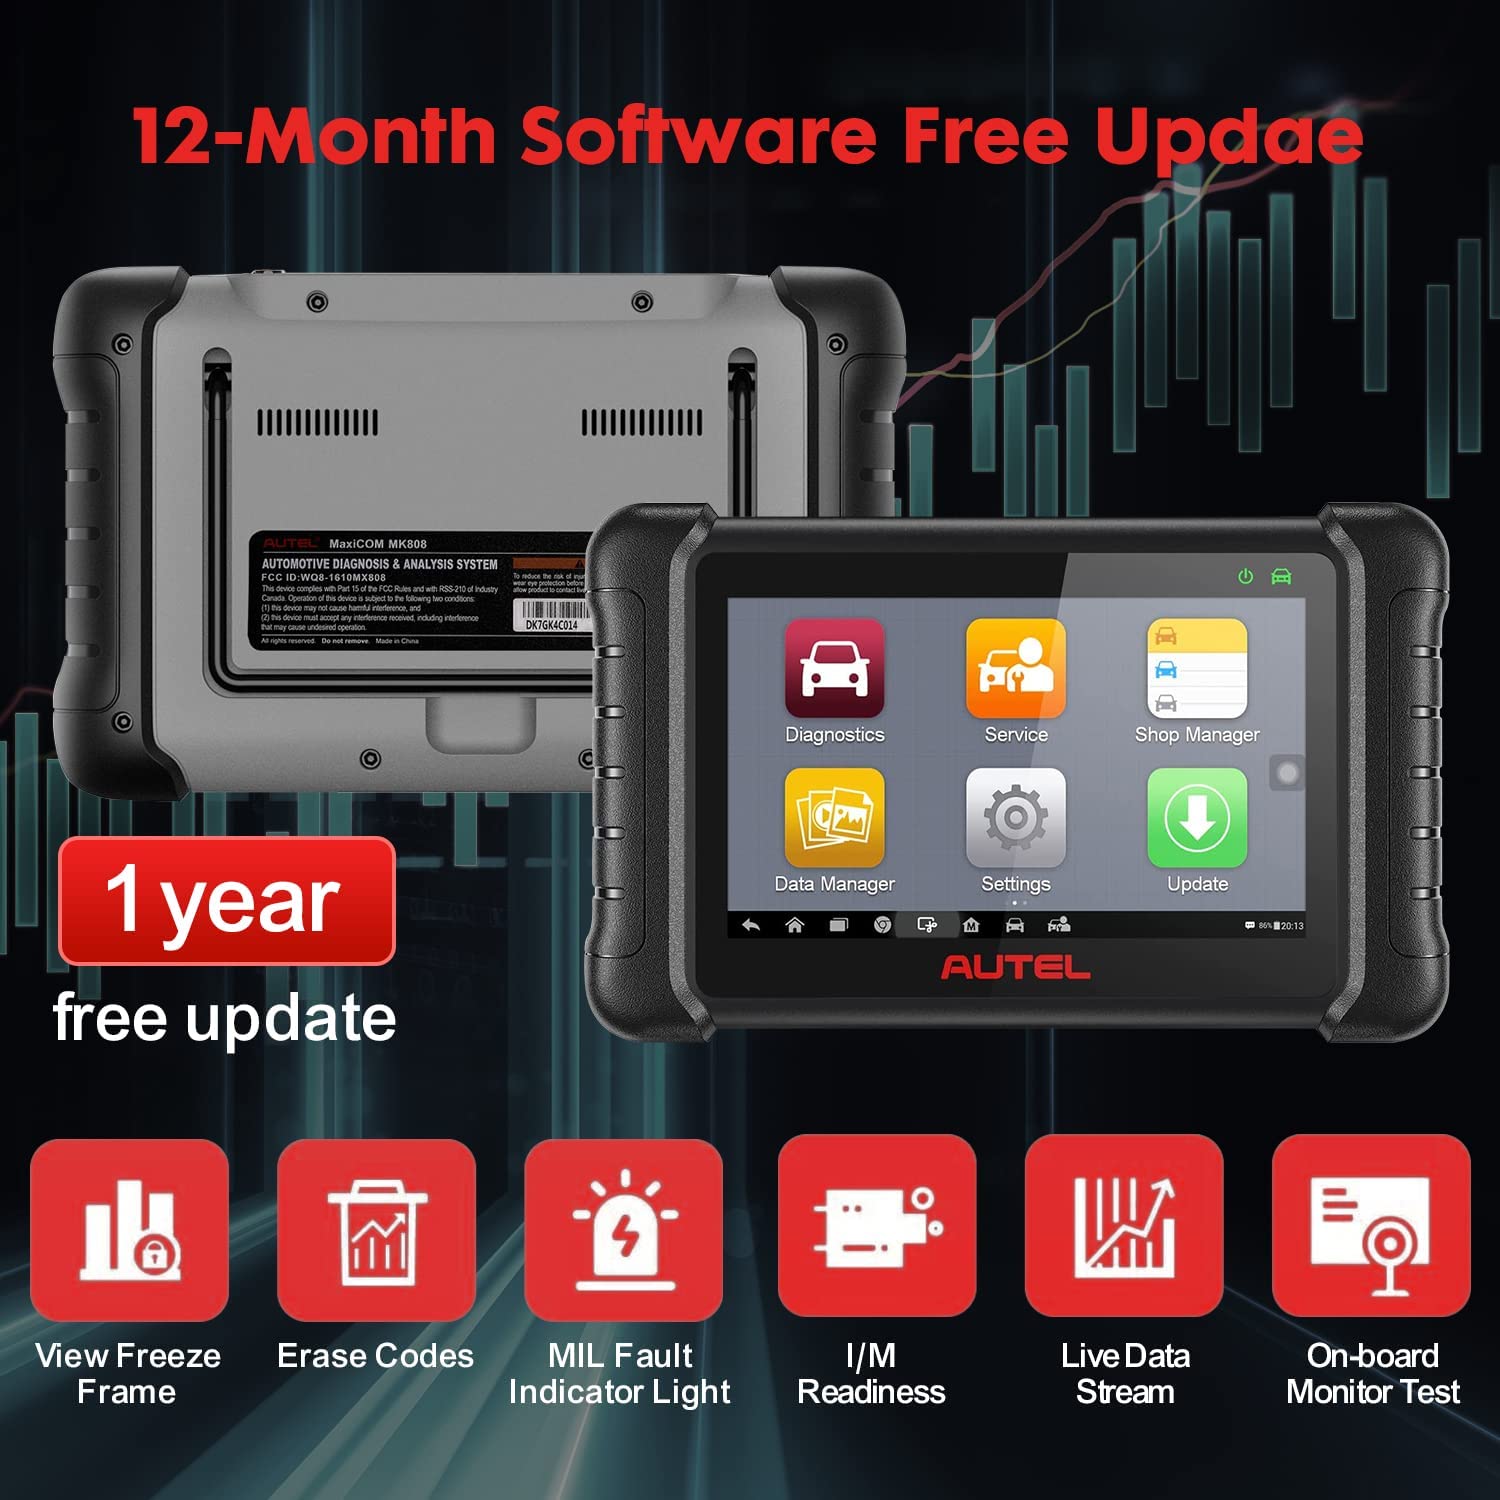 Autel DS808K come with 1 year free software update 